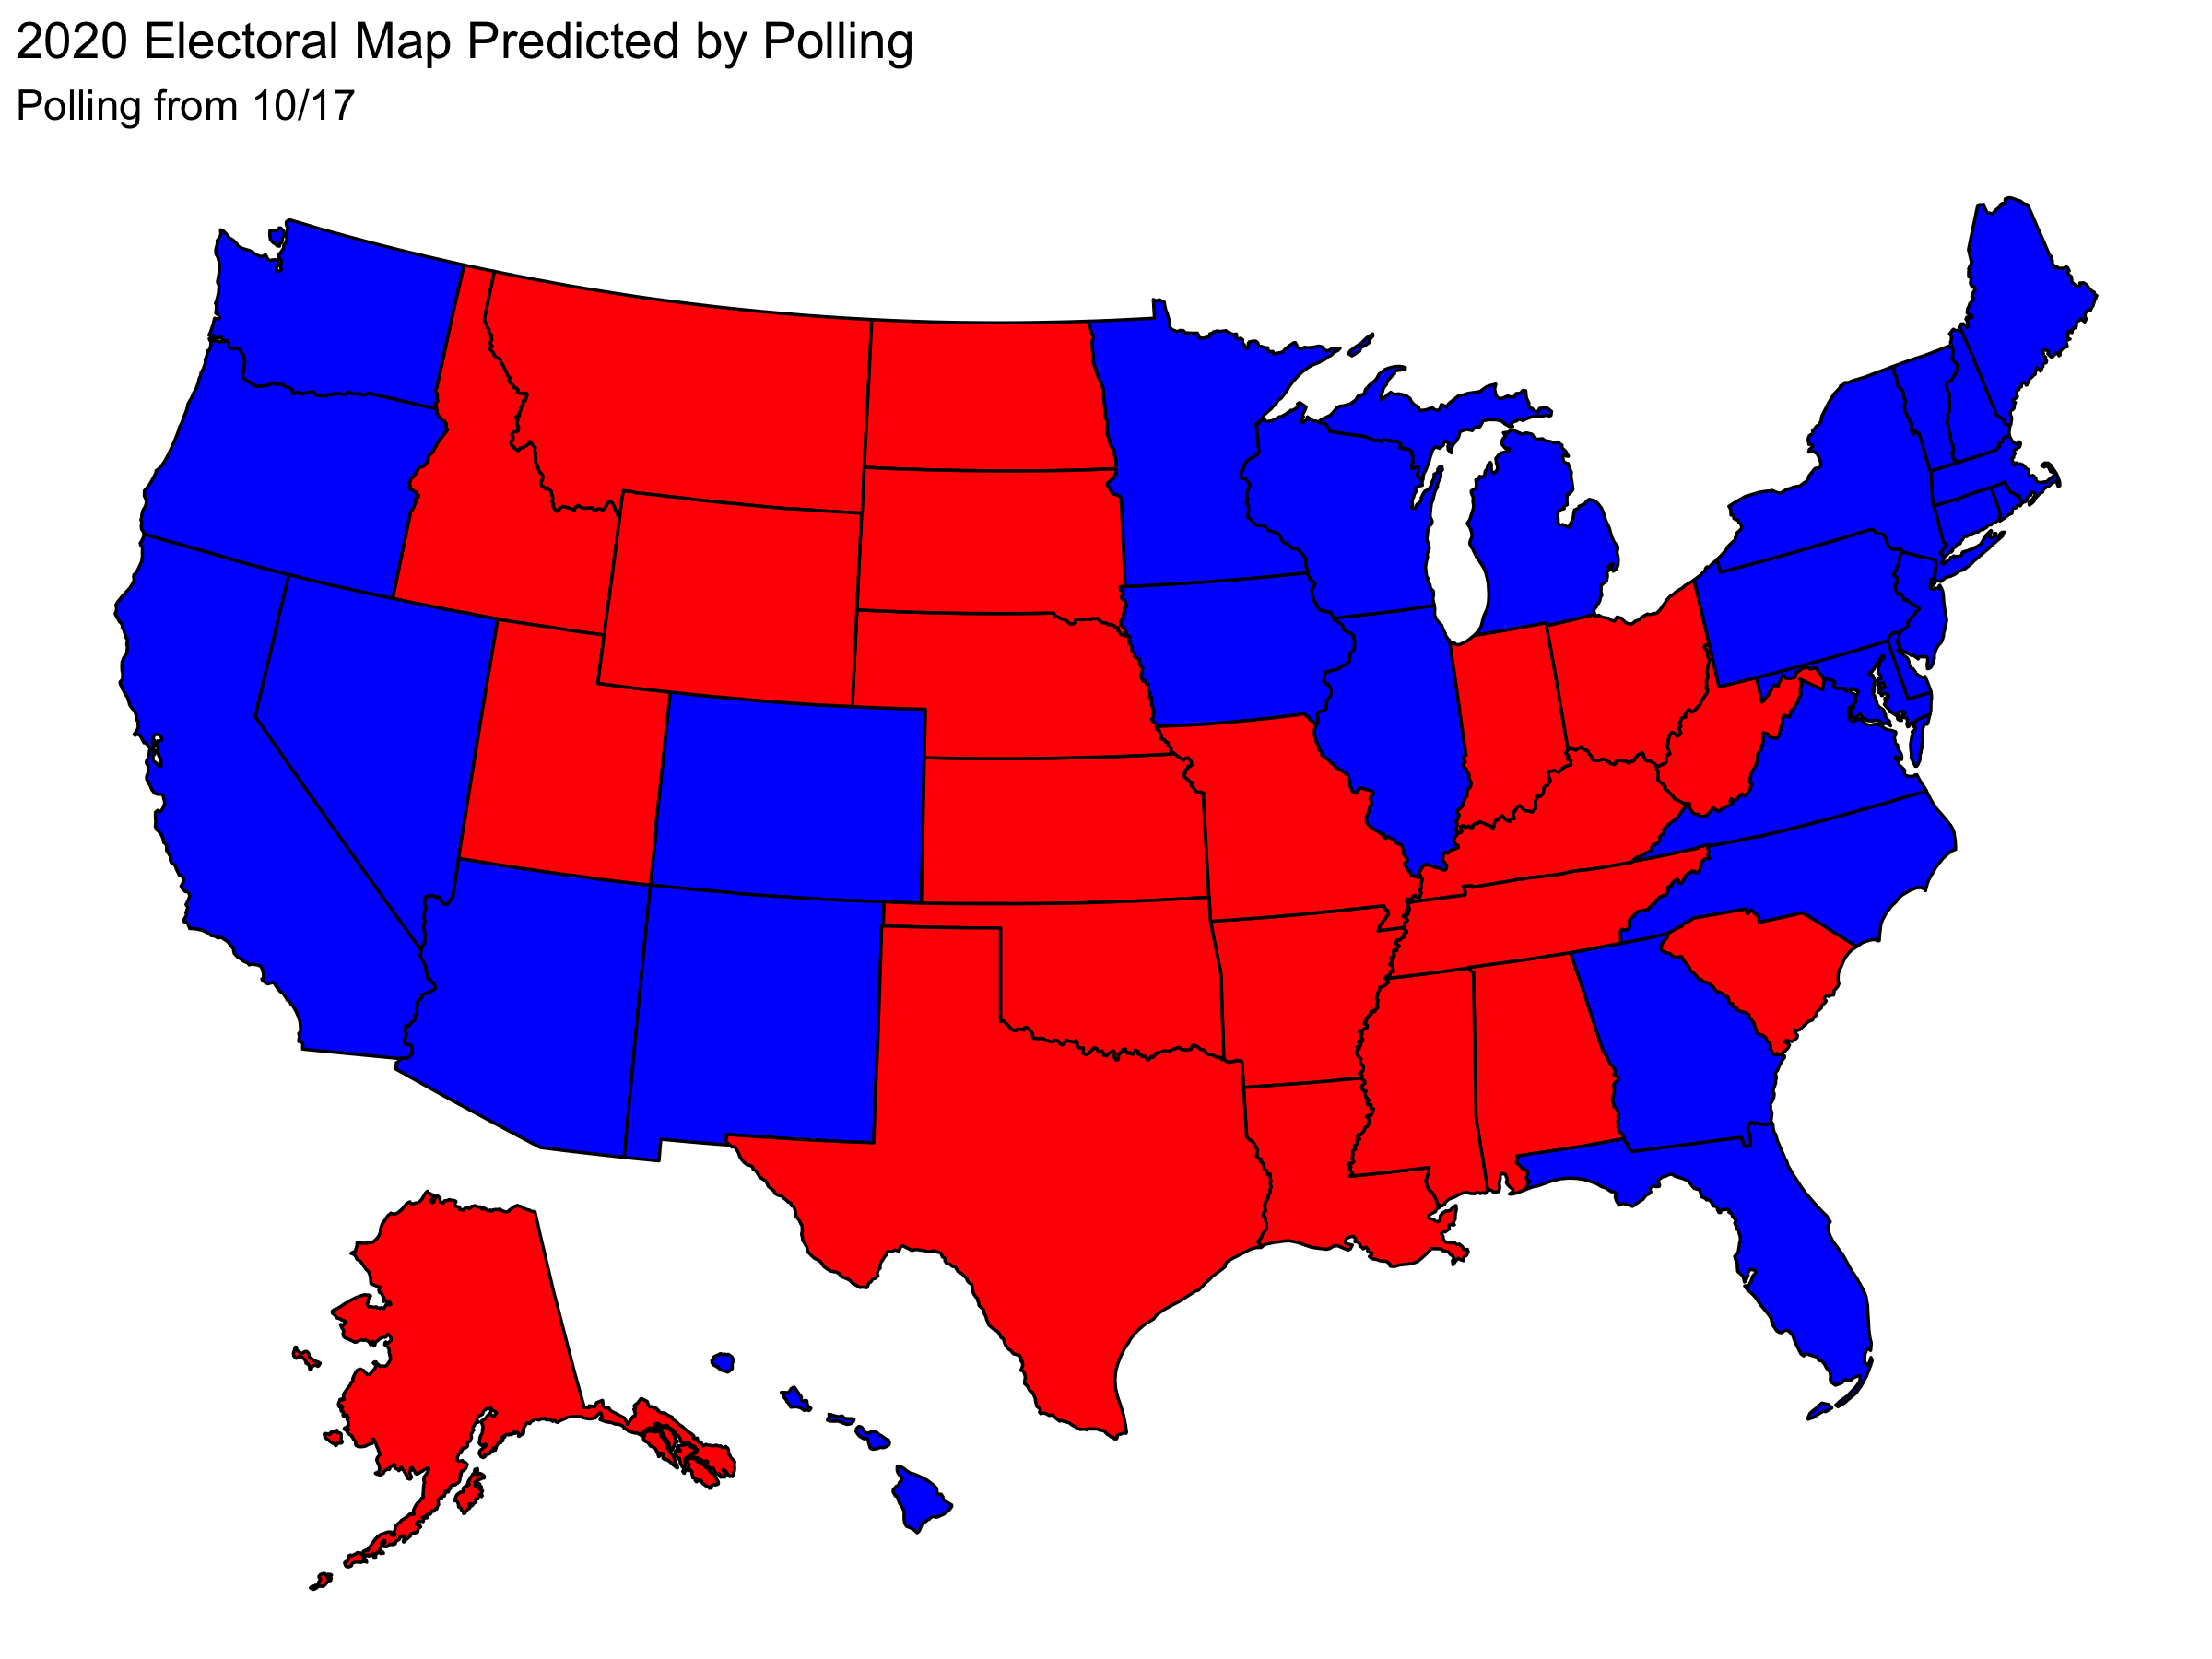 map predicted by 10/17 state polling